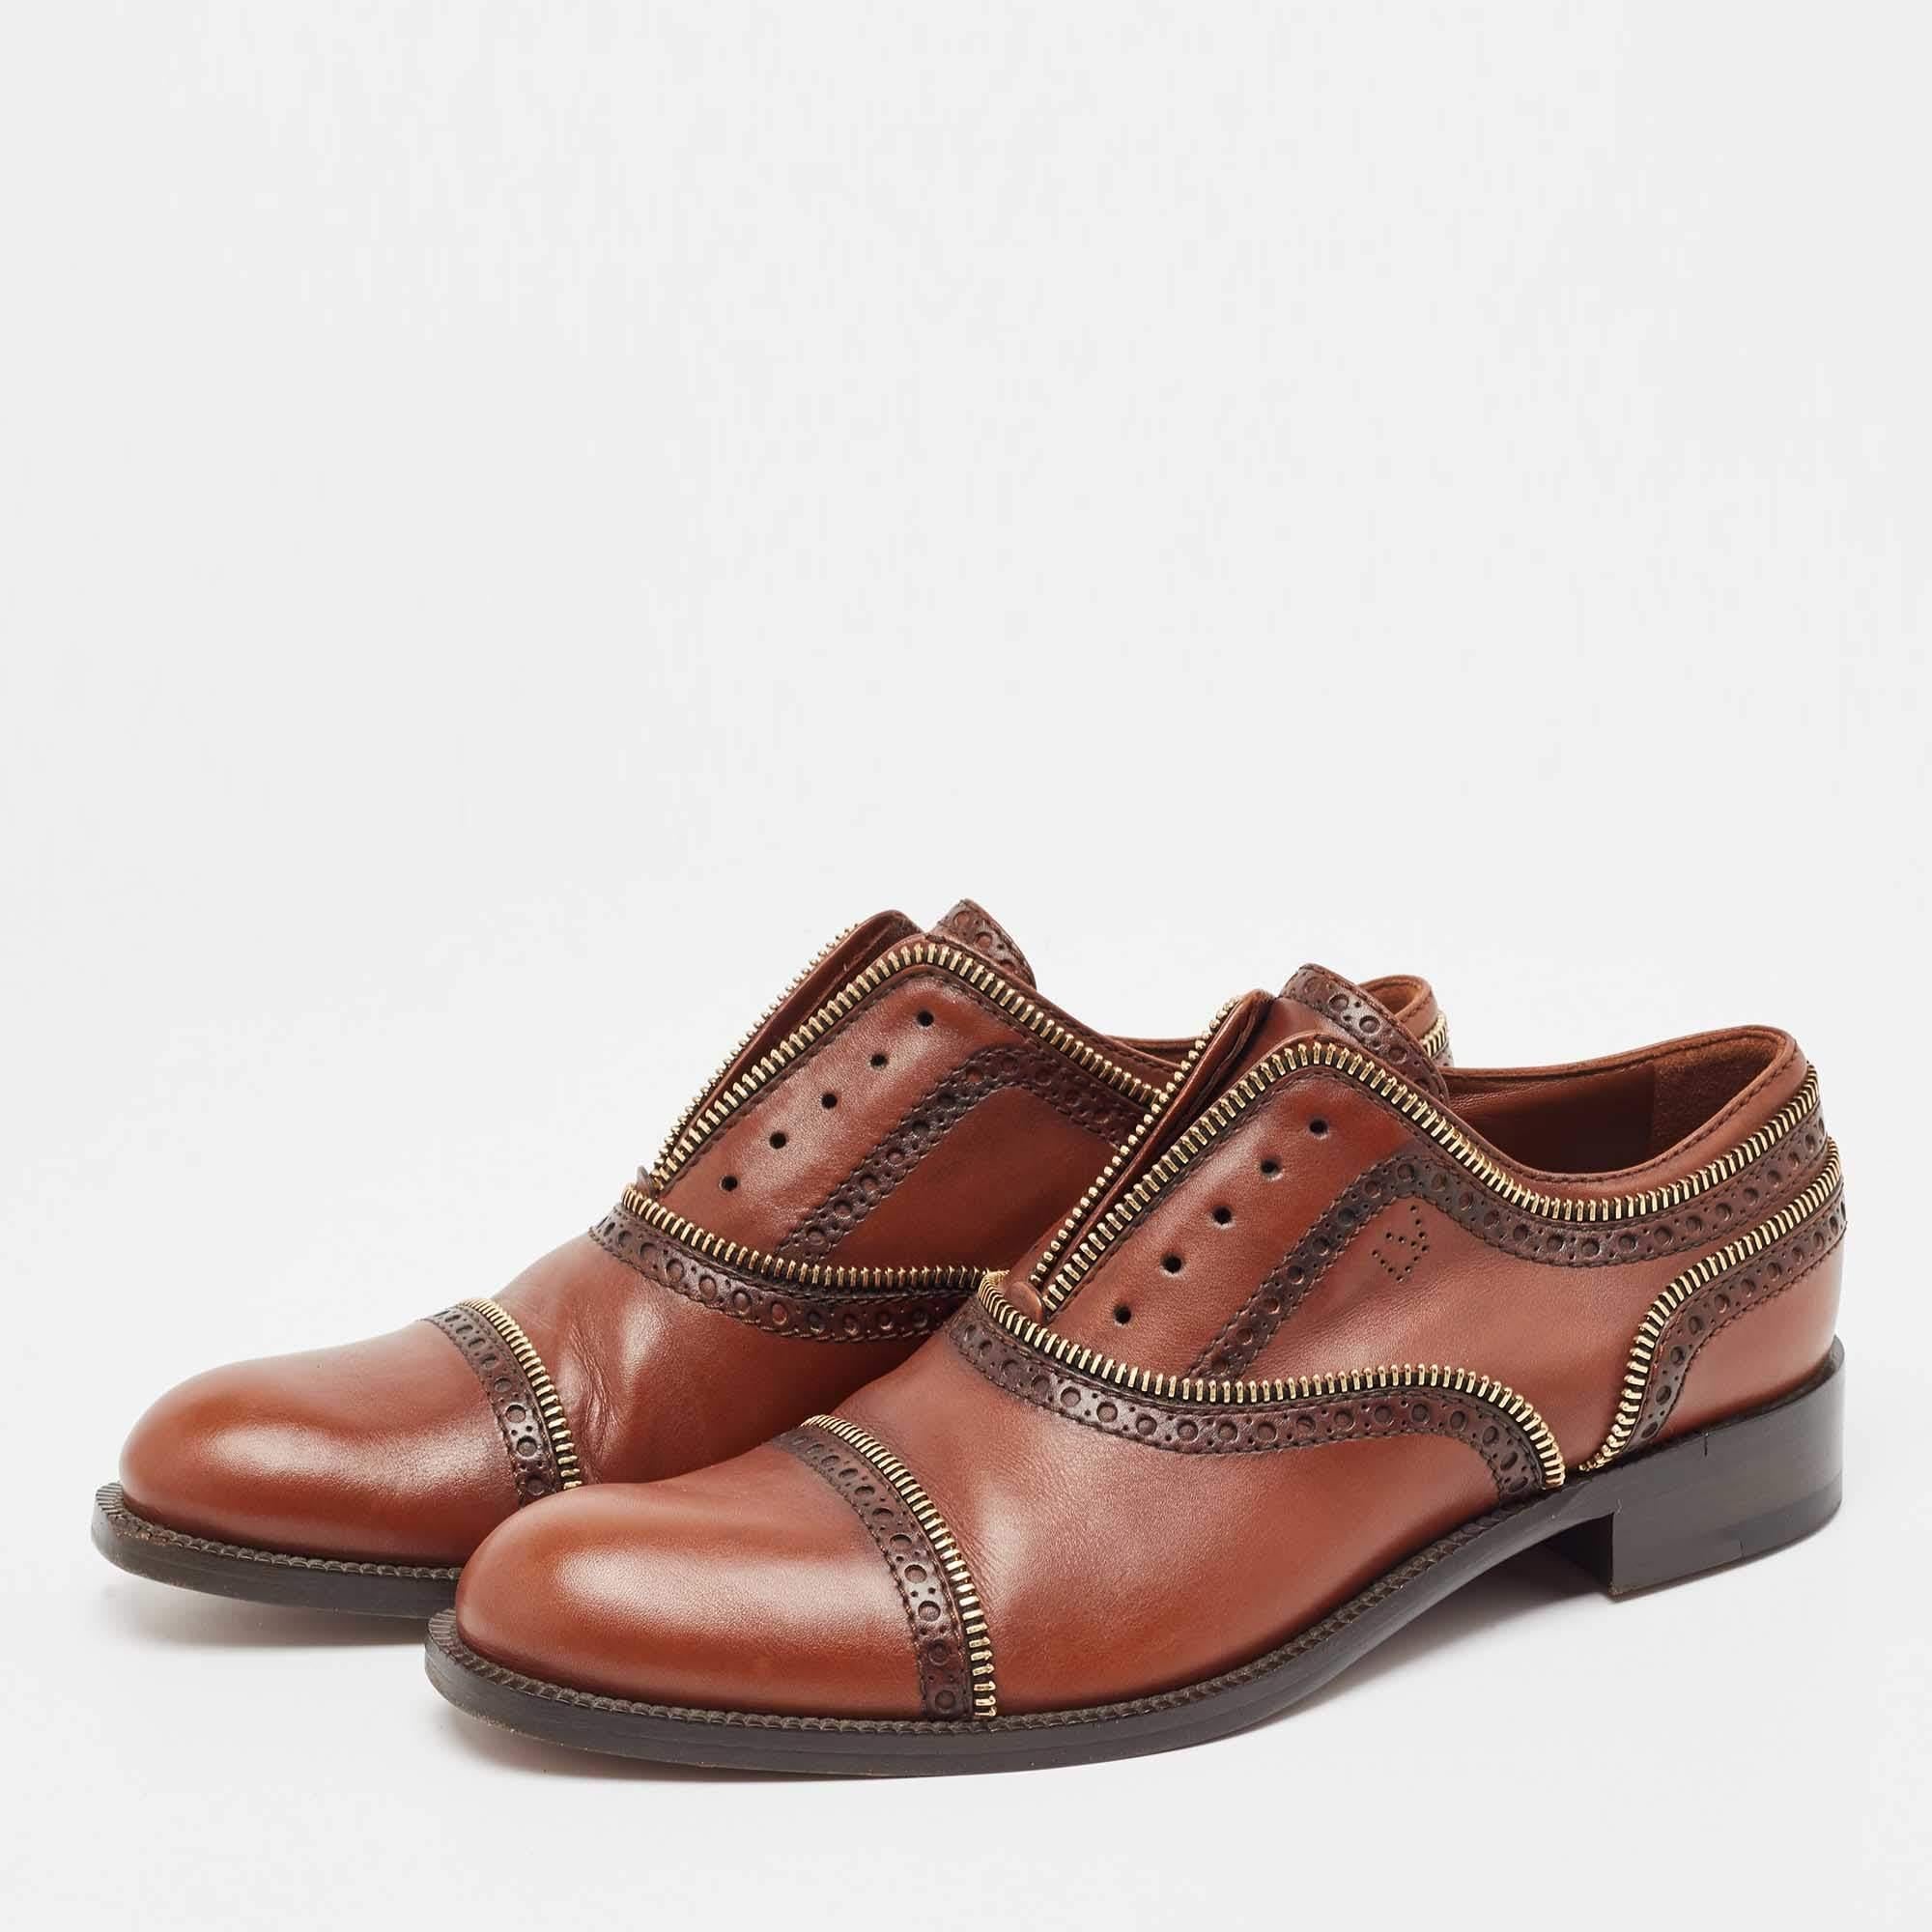 Practical, fashionable, and durable—these designer shoes are carefully built to be fine companions to your everyday style. They come made using the best materials to be a prized buy.

